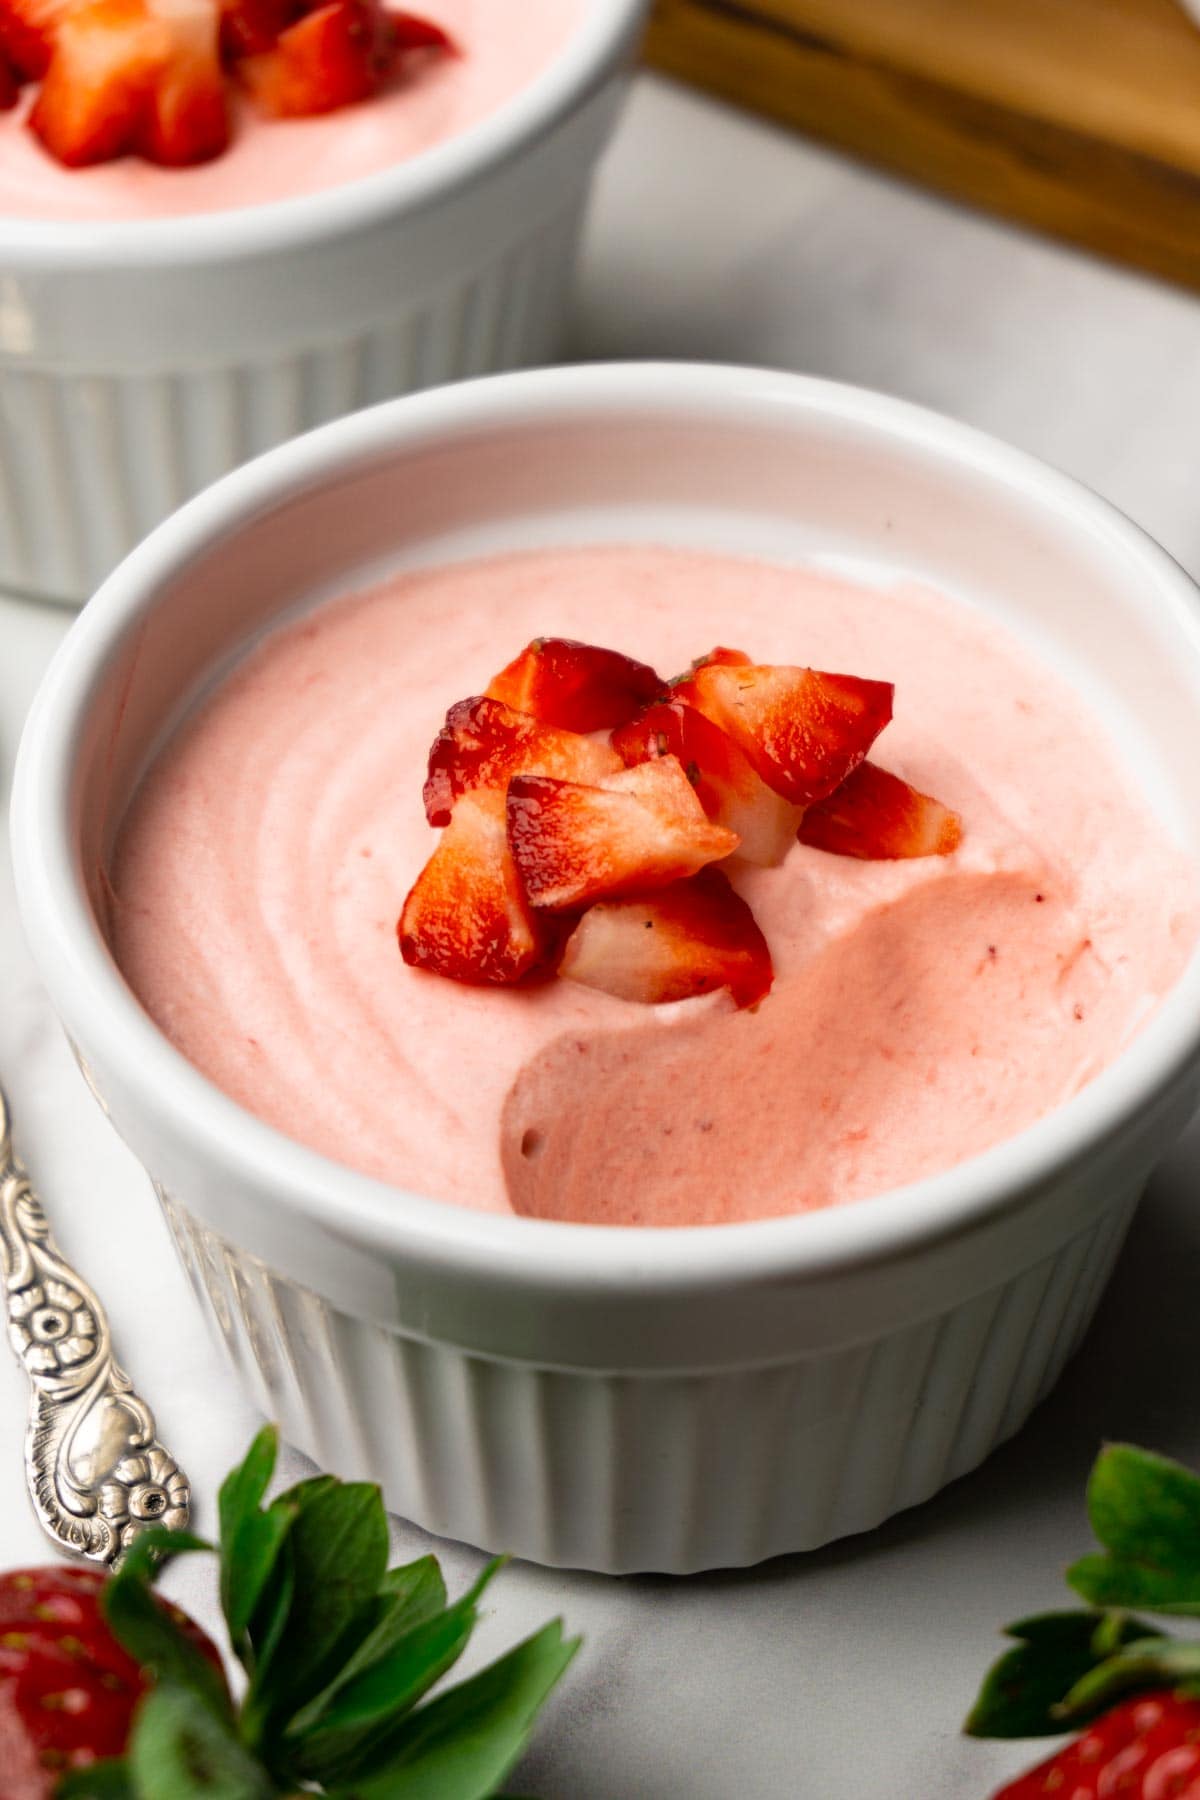 Strawberry mousse decorated with cubed fresh strawberries served in a white ramekin, one spoon is taken.